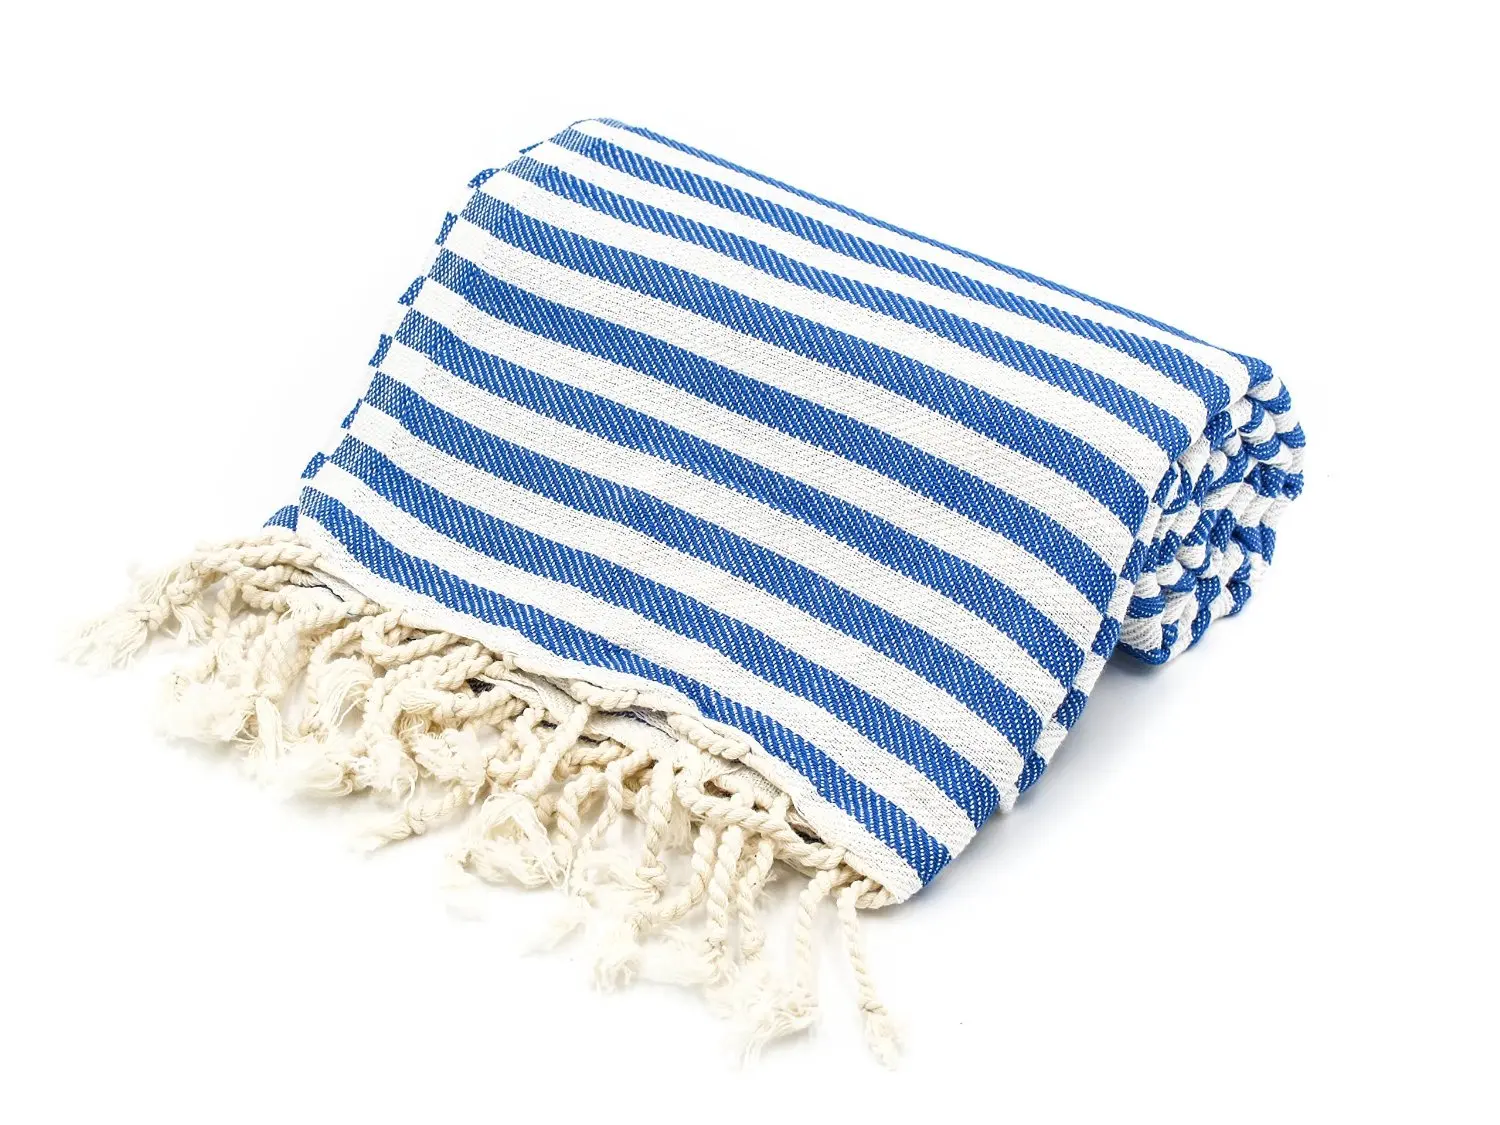 Quick Dry 70 x 36 inches Turkish Cotton Beach Blanket Blue Absorbent Extra Large Cabana Pool Towel with Tassles Accented Beach Towel